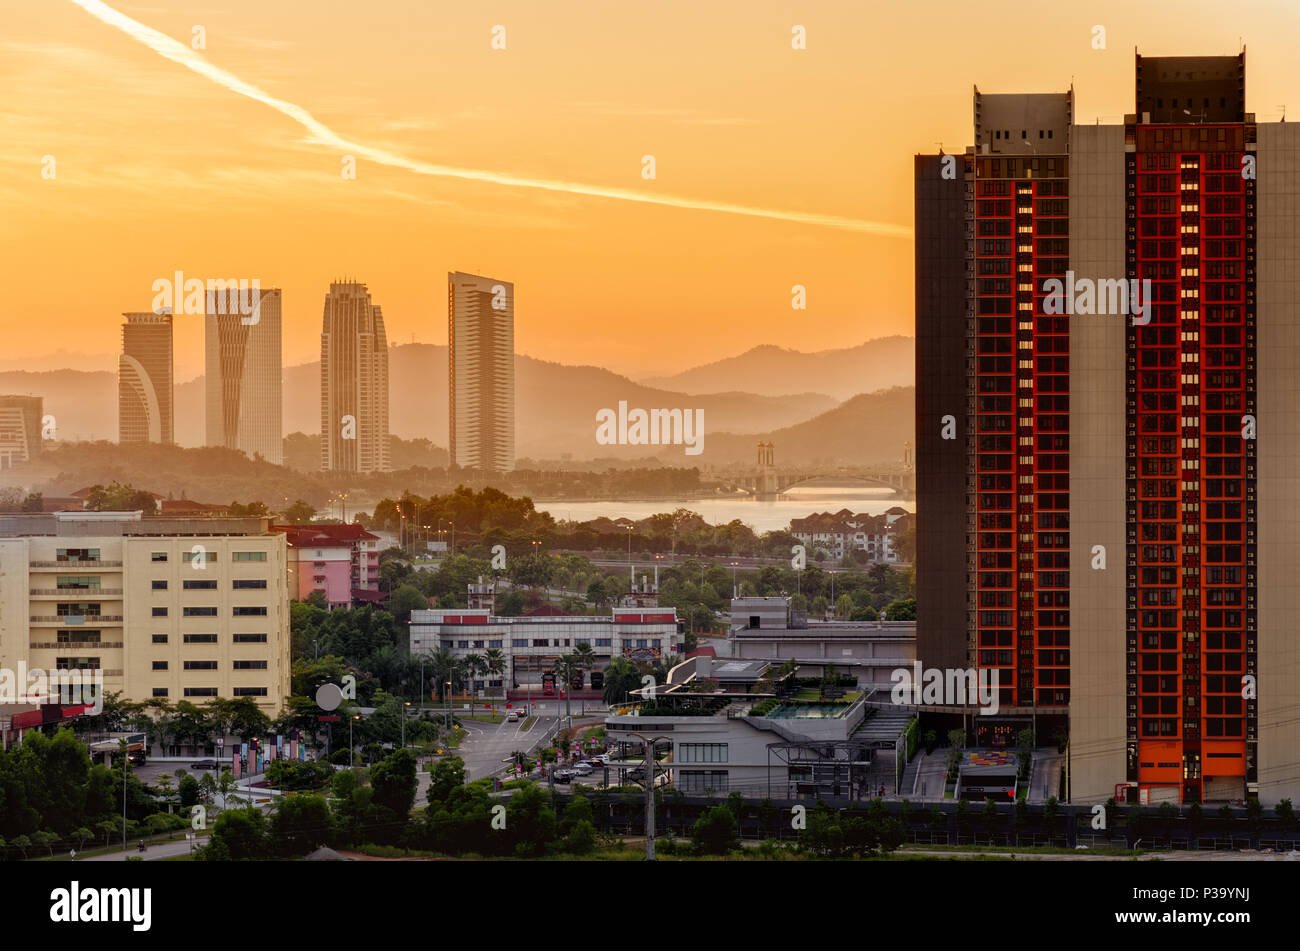 View of modern city at dawn. Beautiful city landscape with high-rise office buildings, green trees in parks. Beginning of day. Malaysia, Cyberjaya. Stock Photo